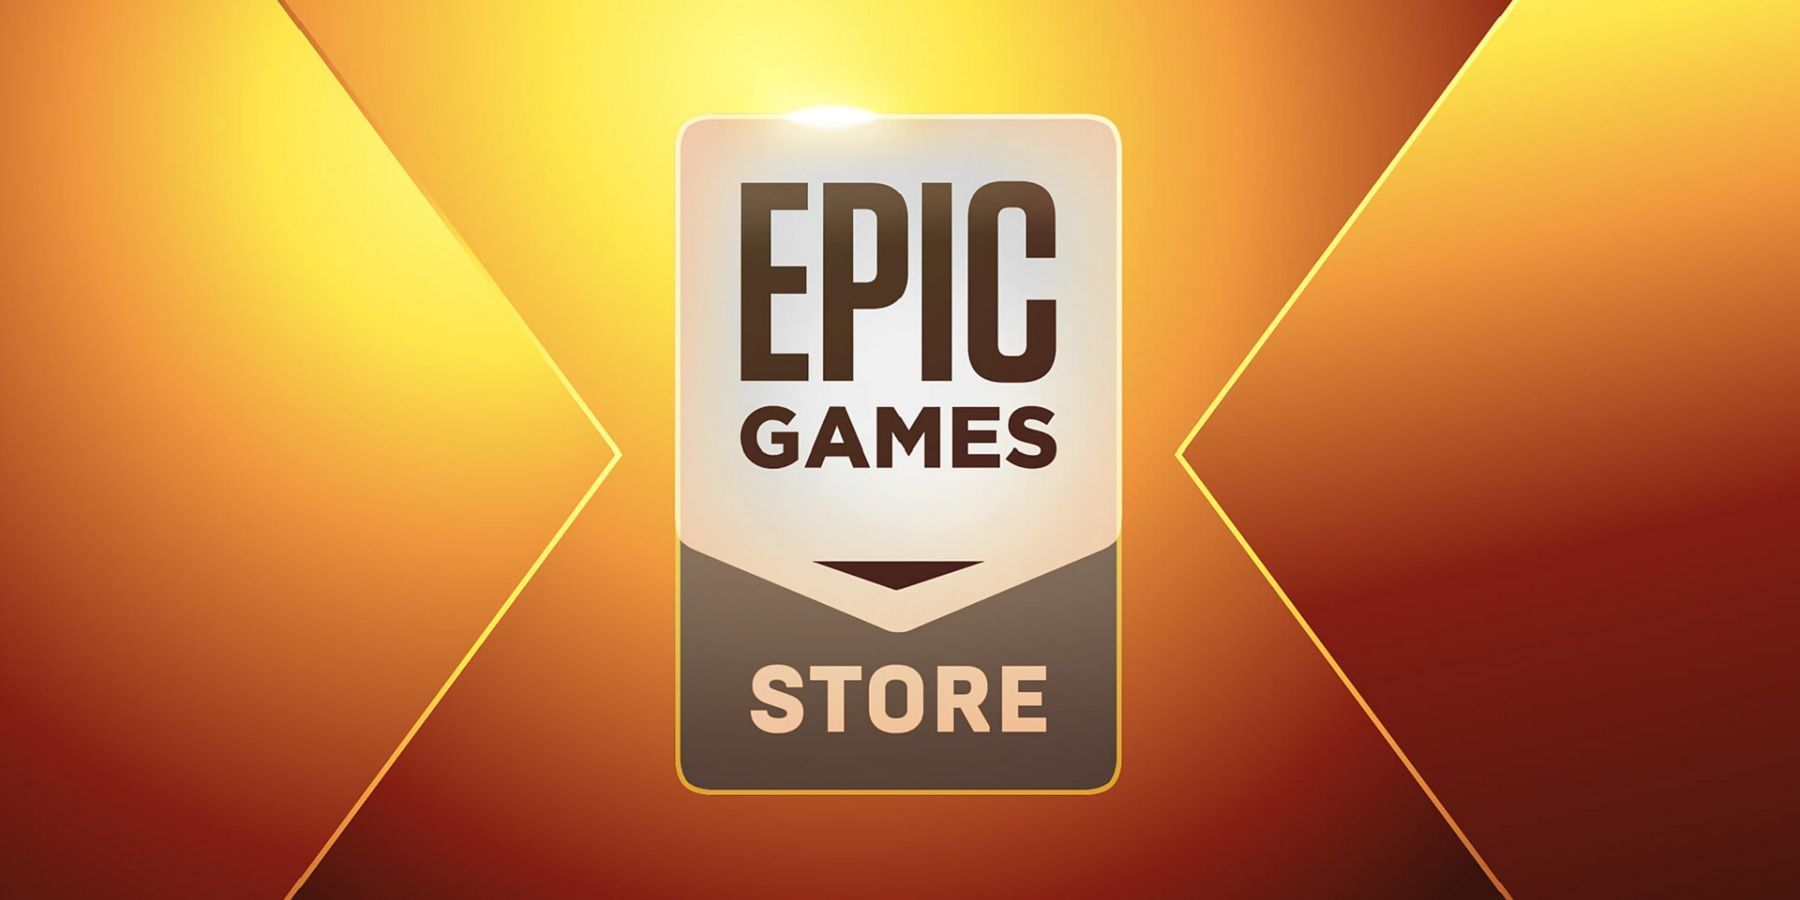 epic-games-store-logo-with-gold-background-1